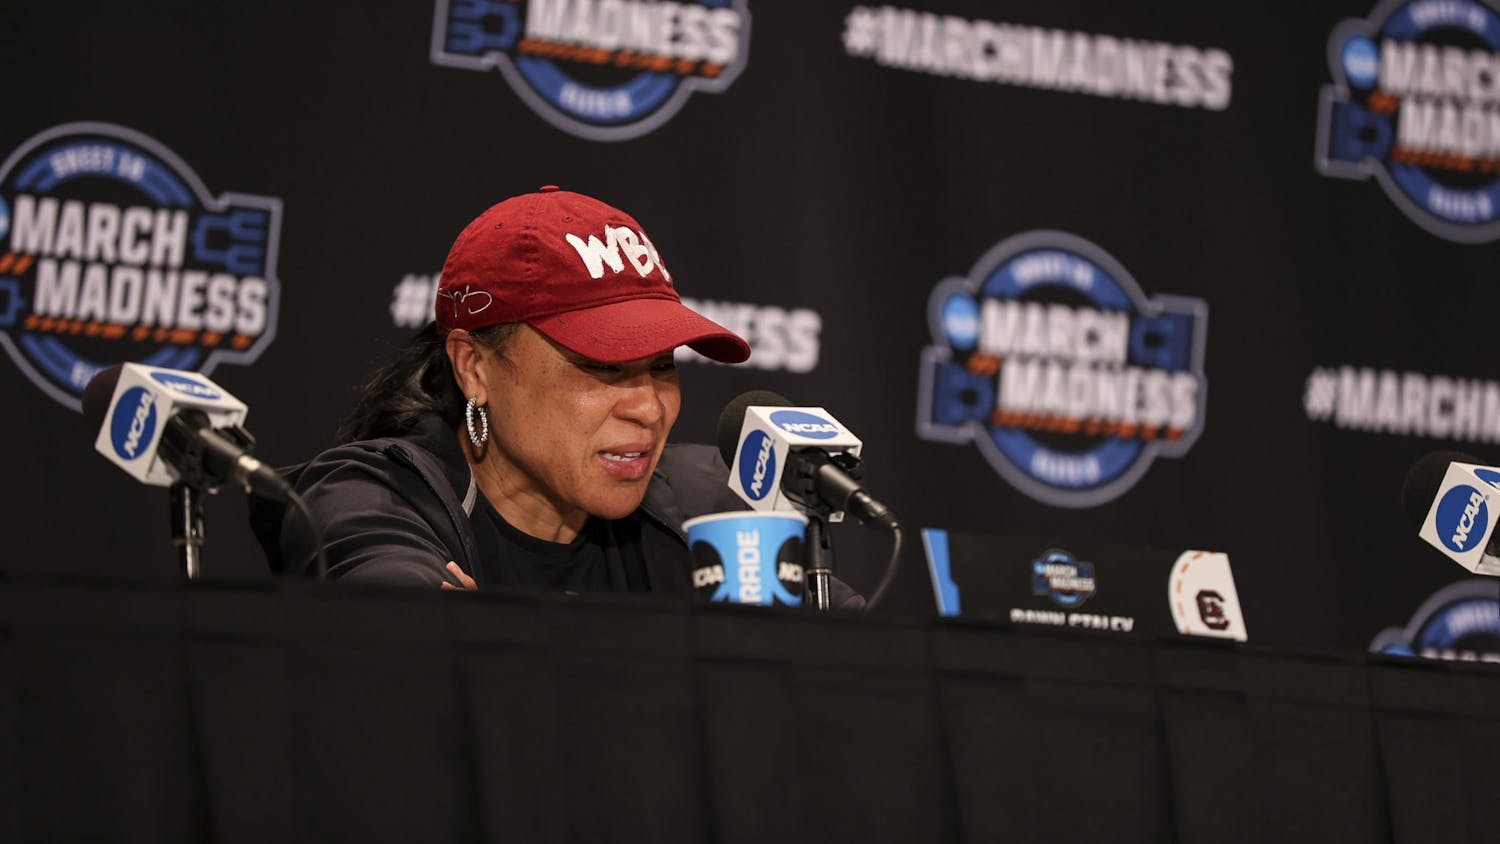 South Carolina head women's basketball coach Dawn Staley spoke to the media Saturday afternoon previewing the Elite Eight matchup against Creighton on Sunday.